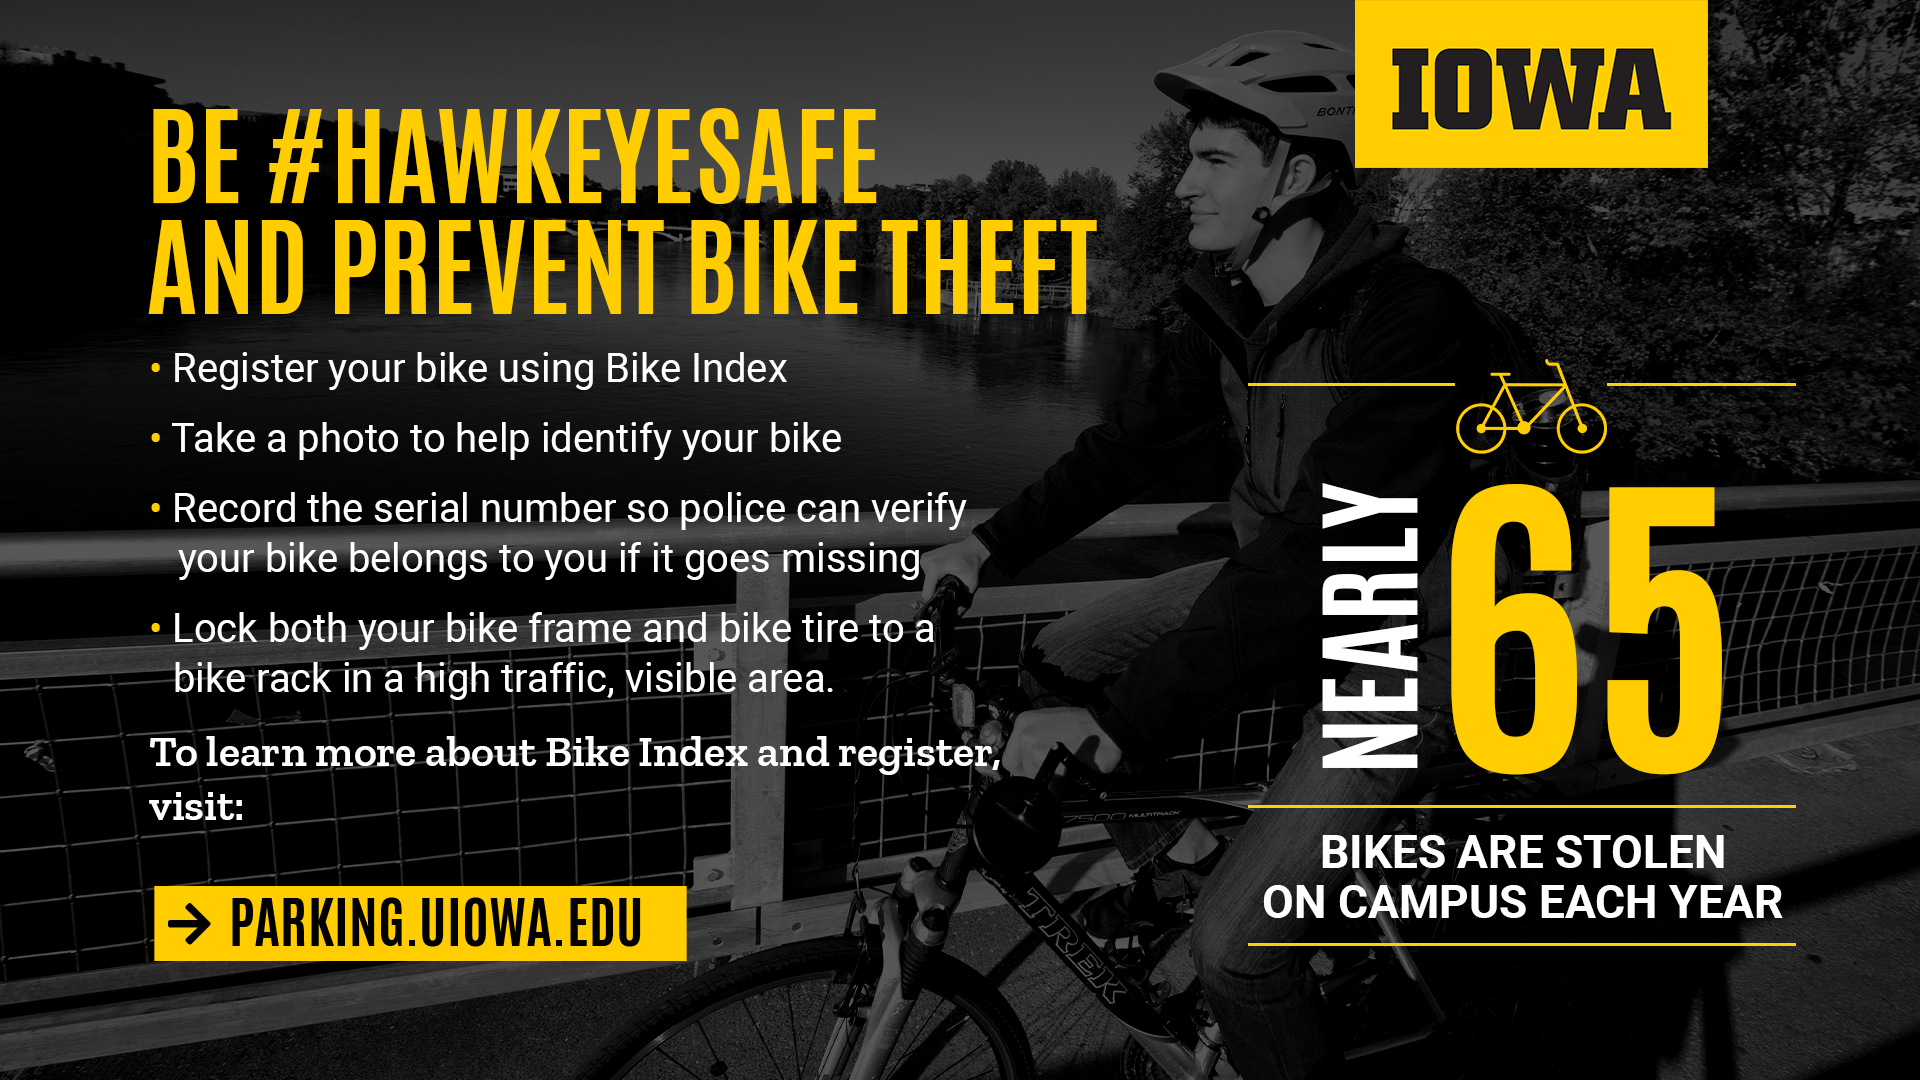 Register your bike to prevent theft